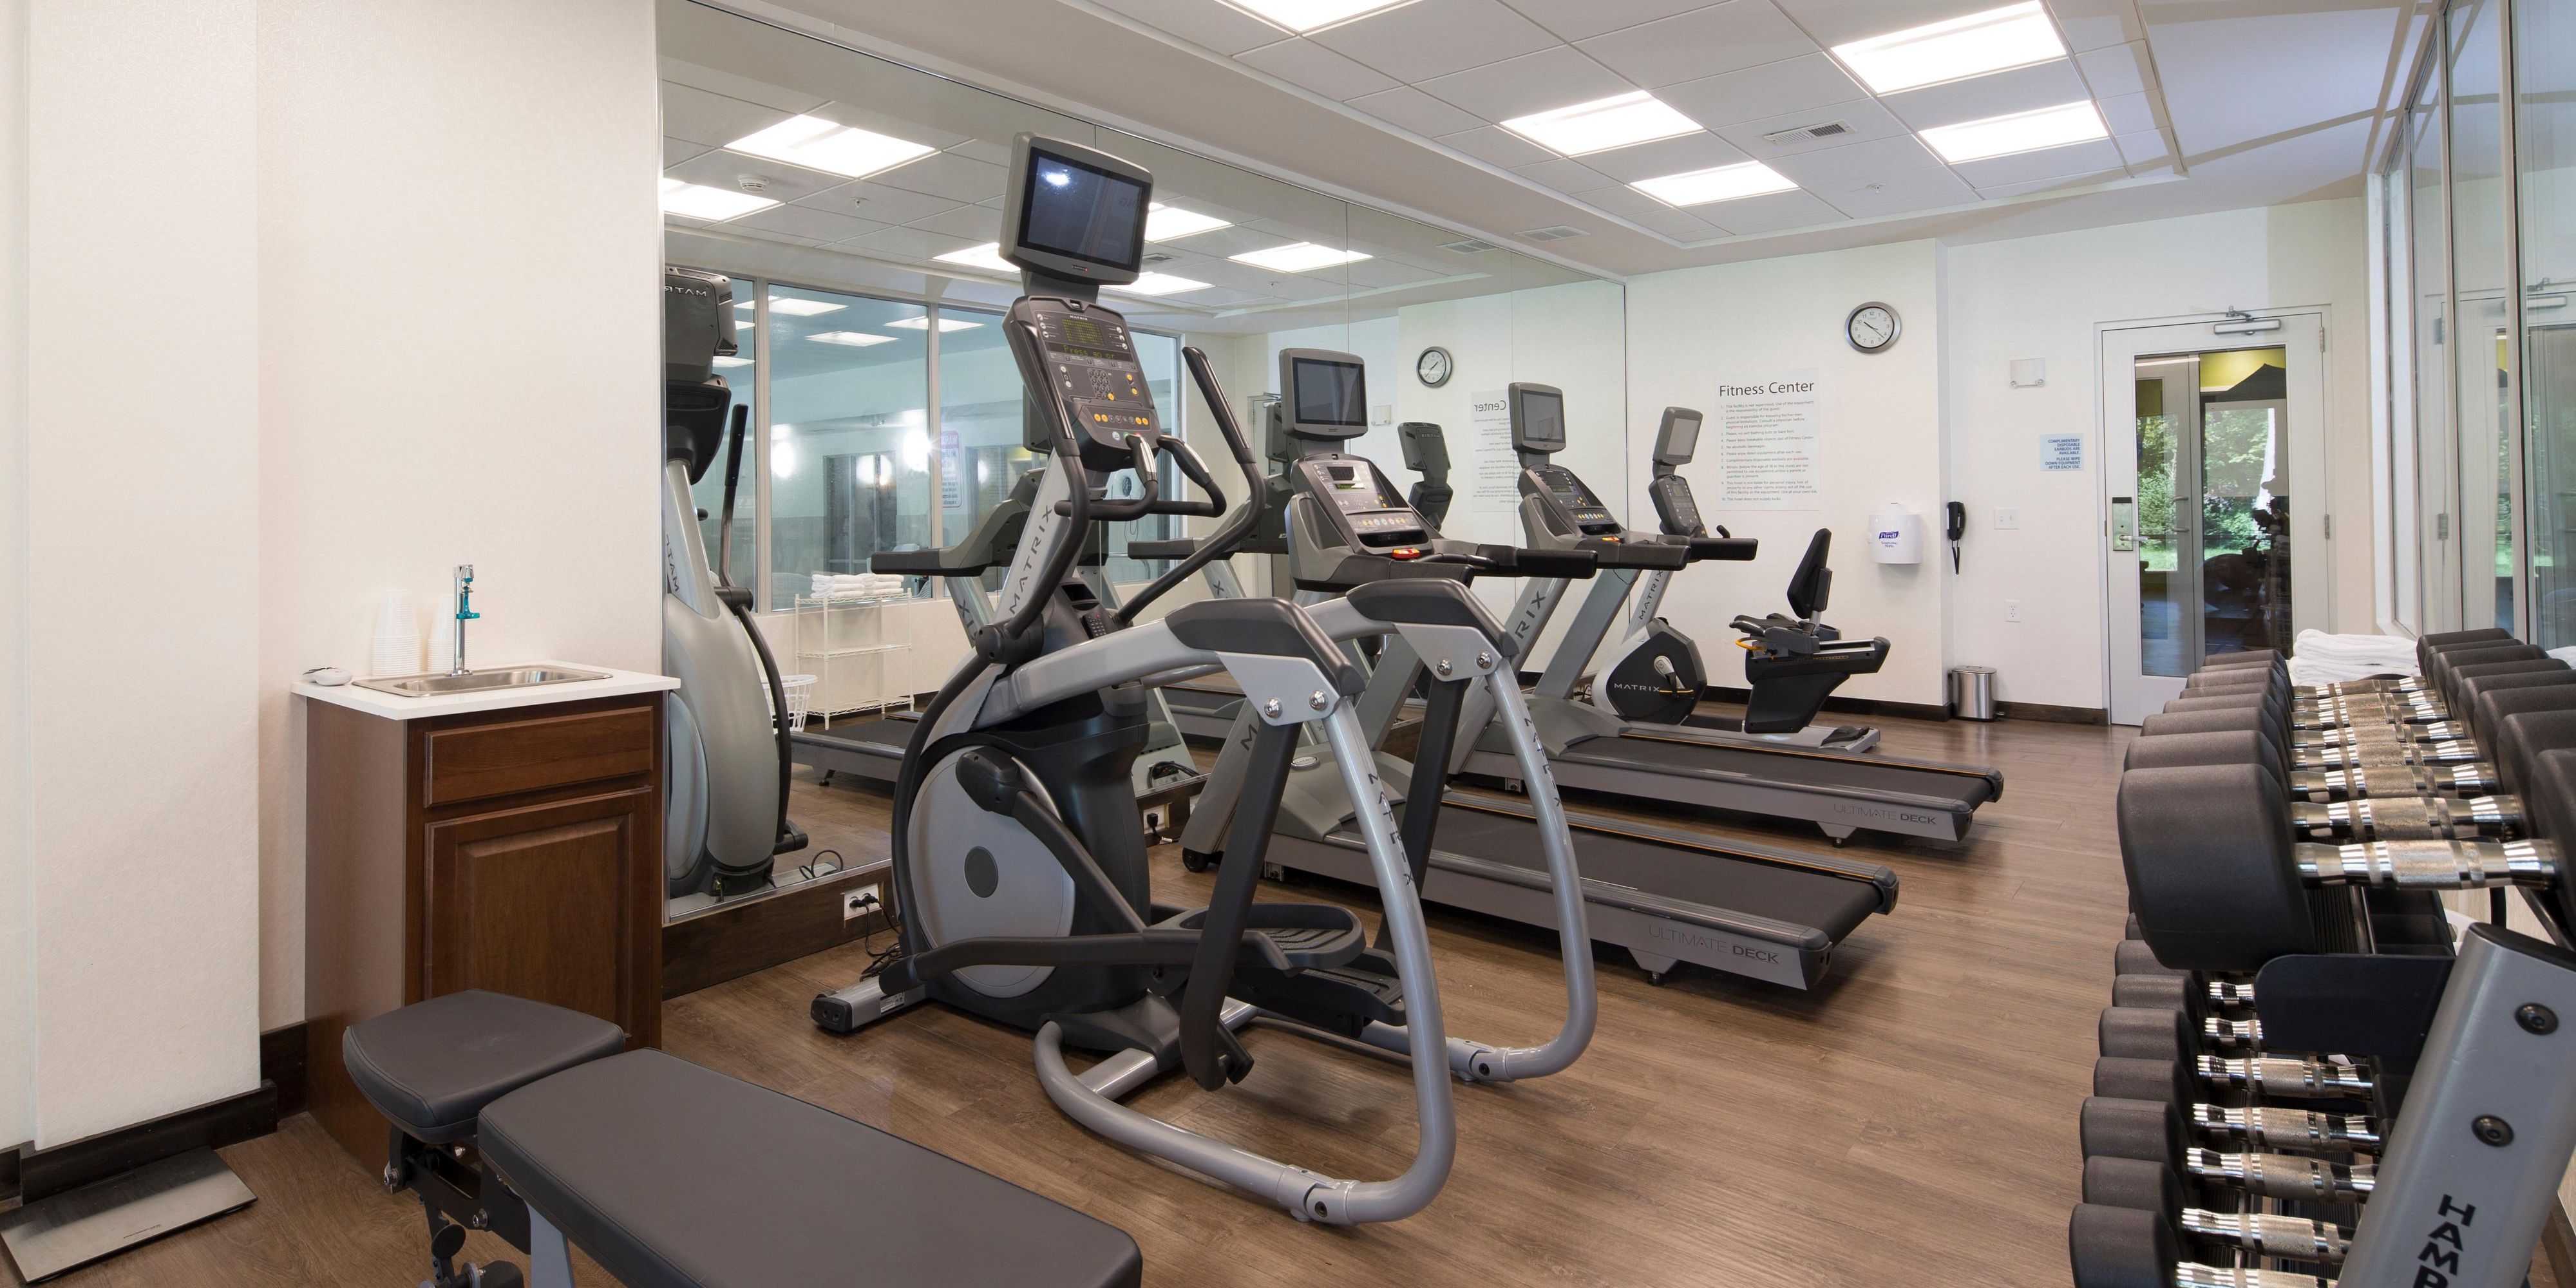 Our fitness center features brand new exercise equipment that can provide a well rounded workout. Cardio machines, free weights, and other items in our fitness center can provide a workout for any level of fitness!